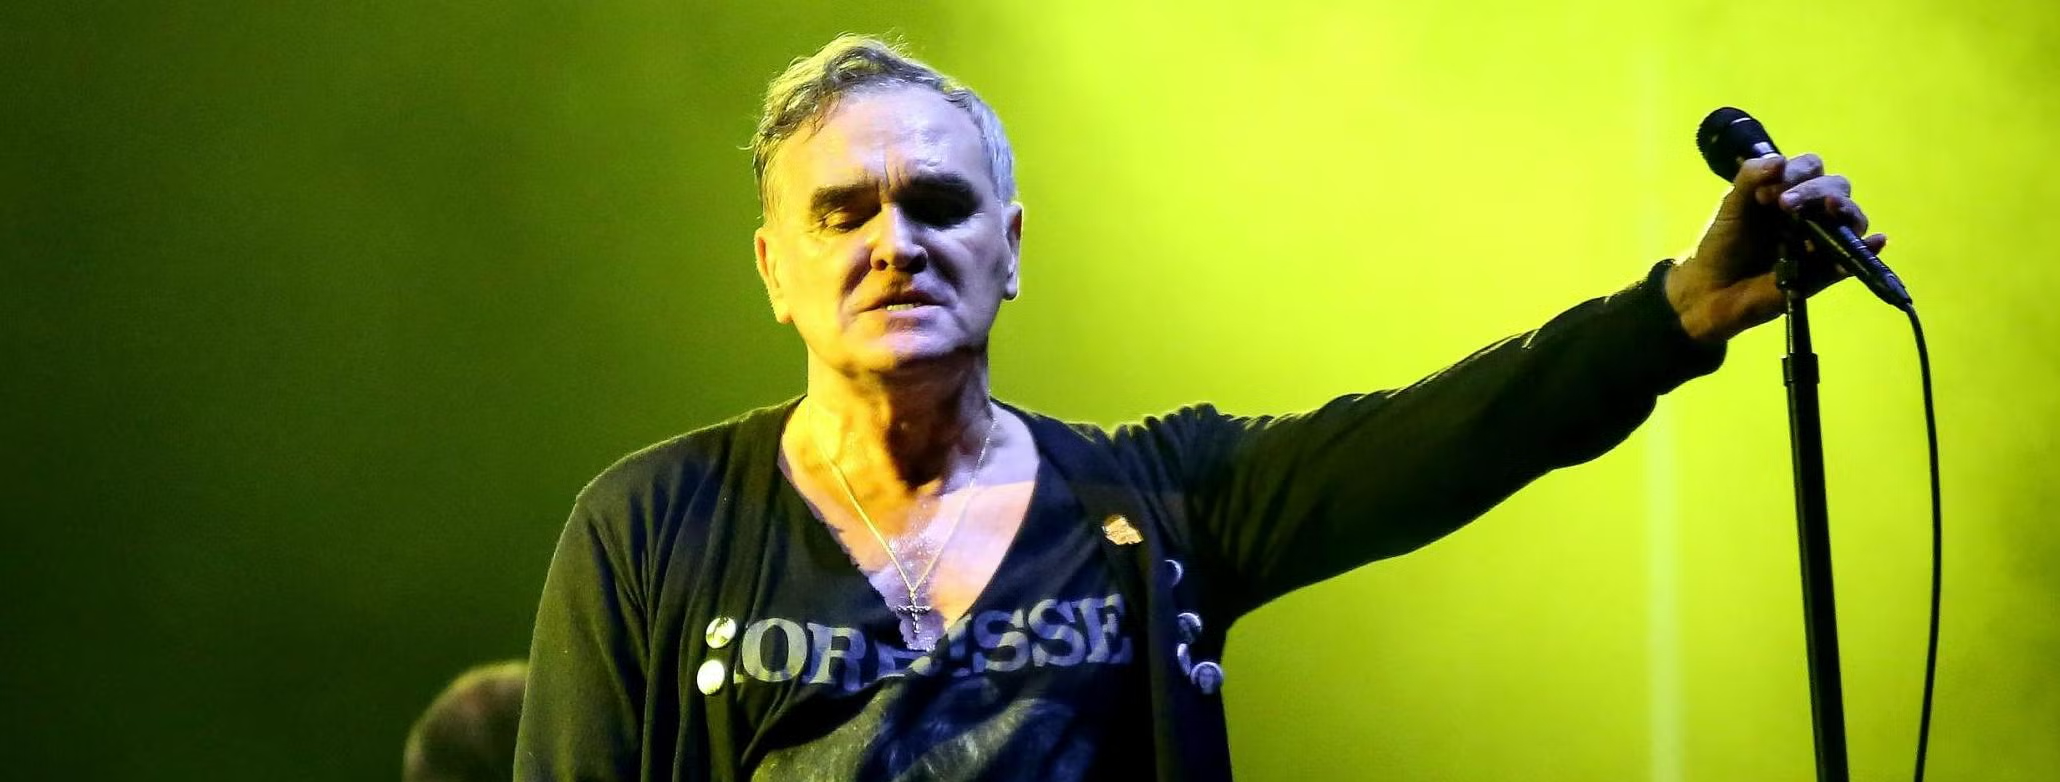 Image of Morrissey singer and song writter